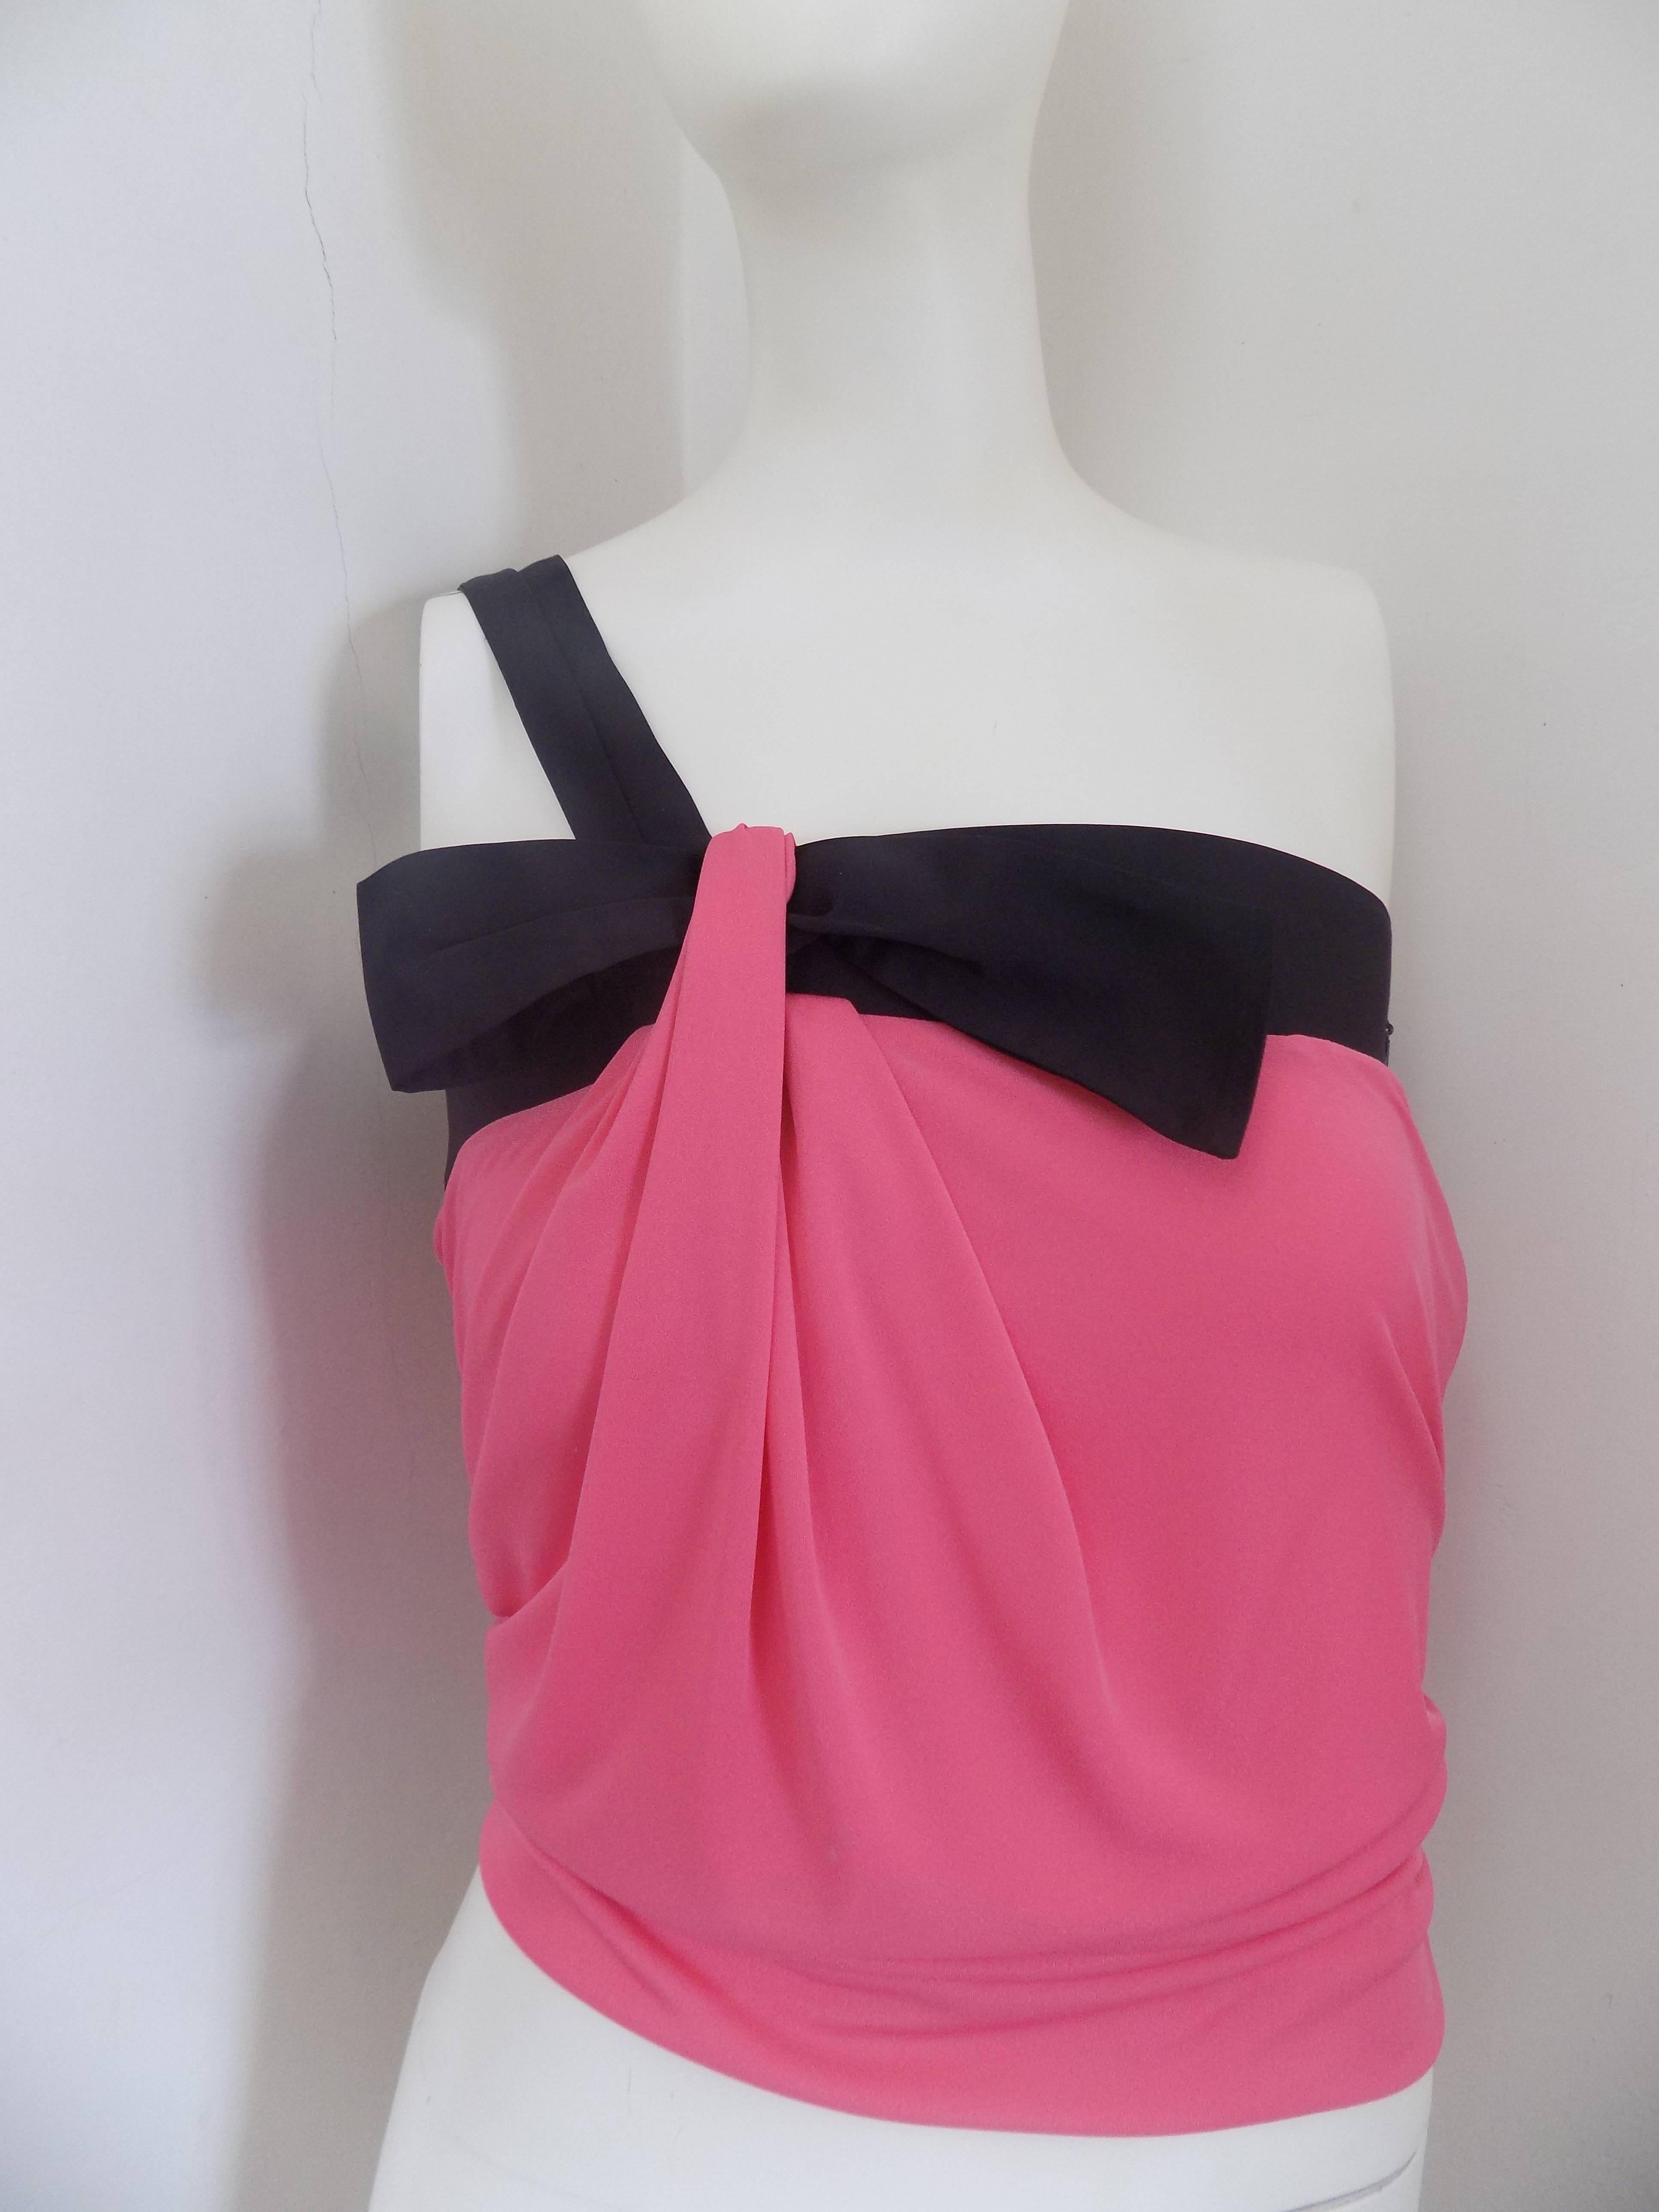 Gucci Pink Black Top
Designed by Tom Ford
Amazing pink and black top, knitwear
Size S